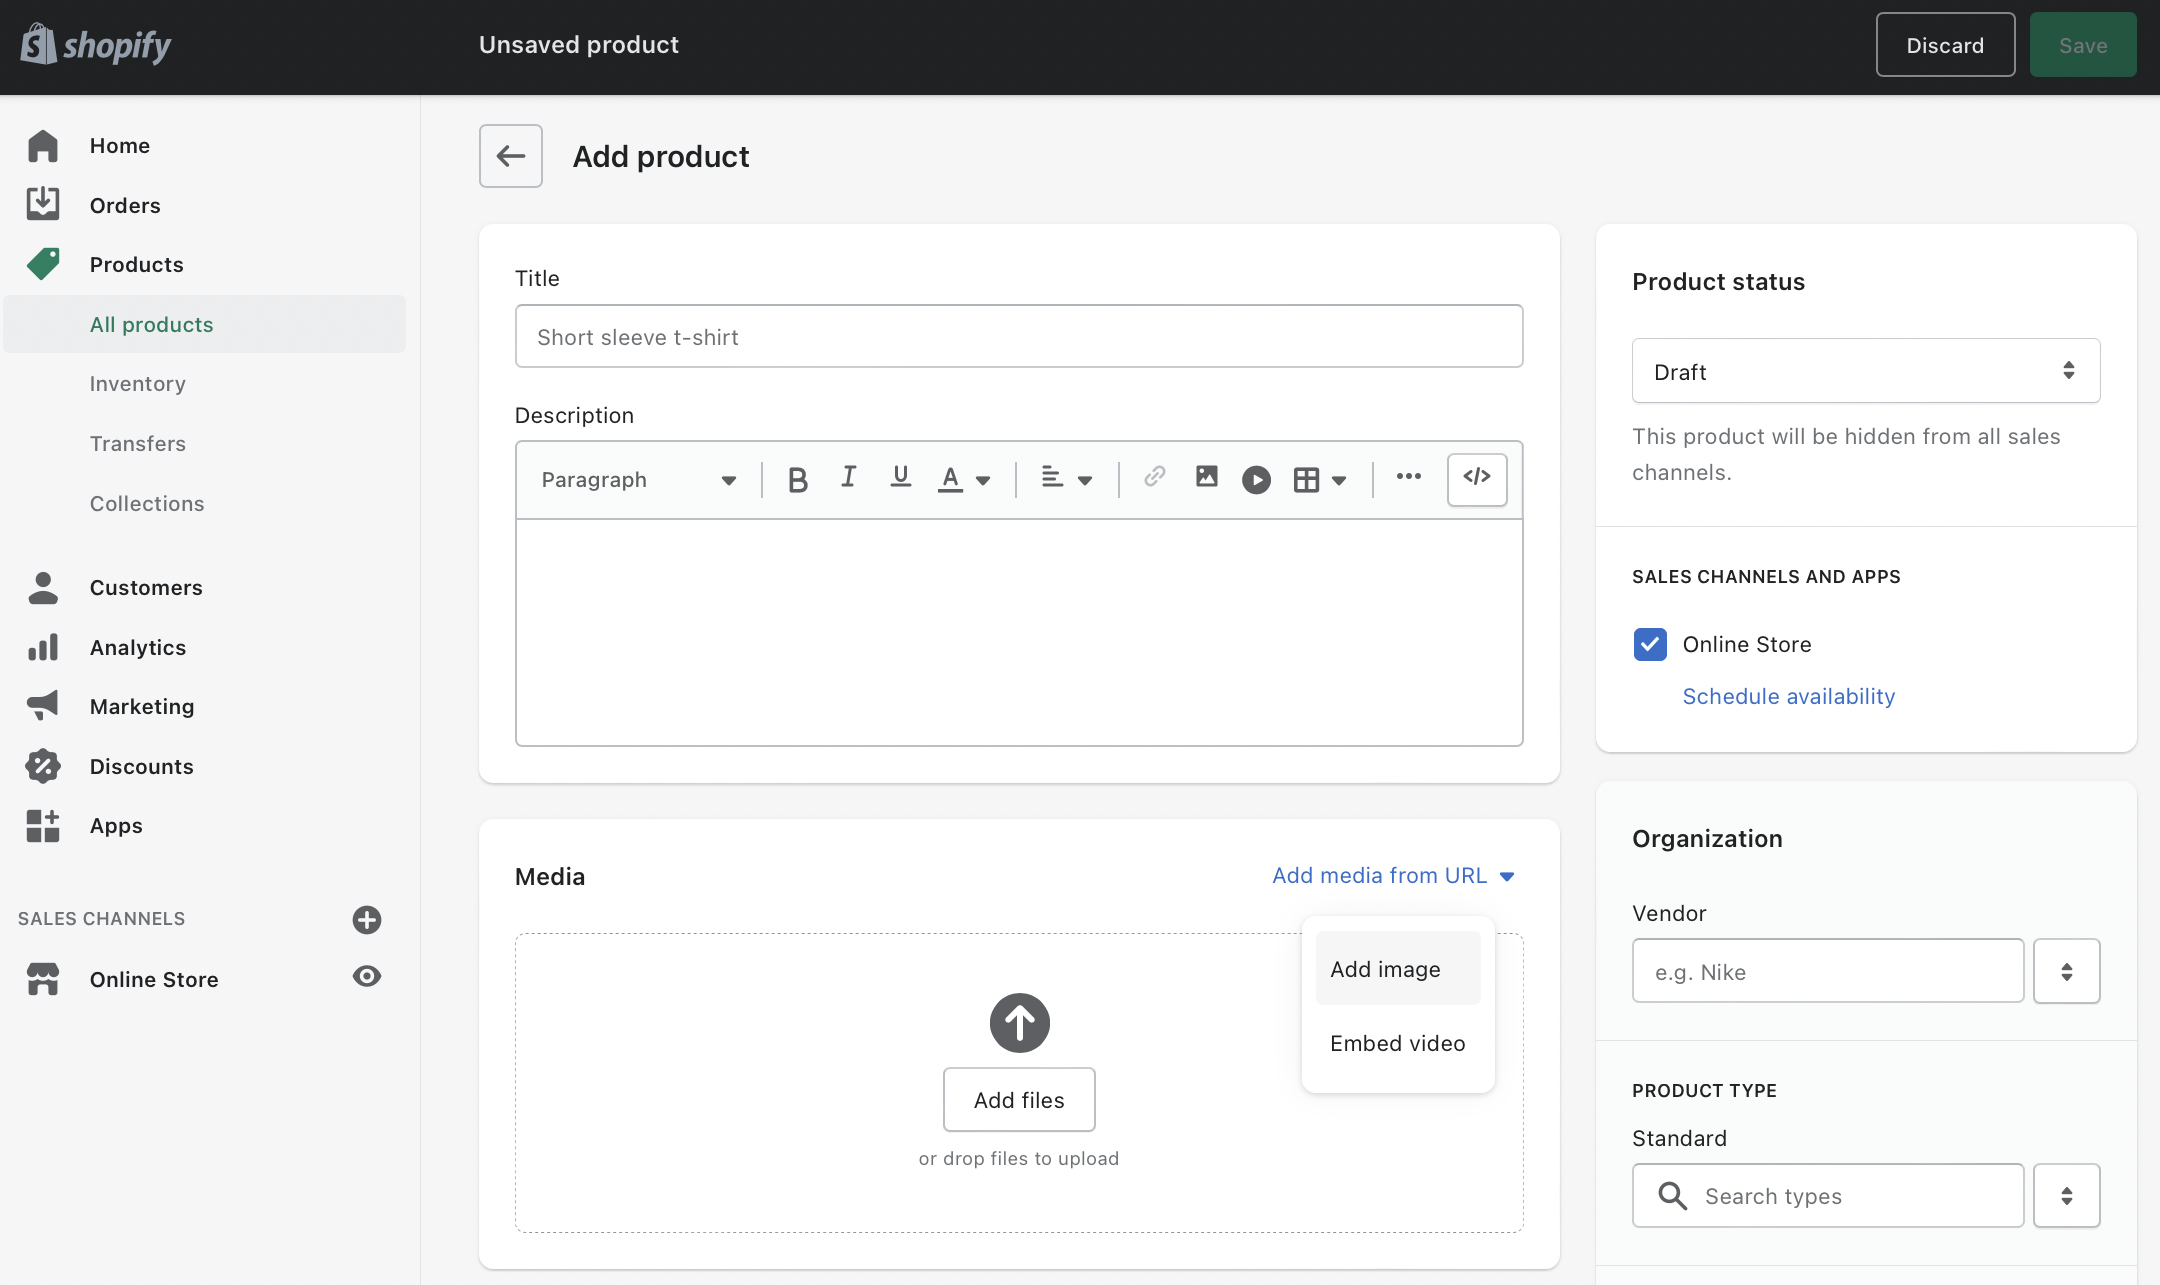 Shopify's product editor page